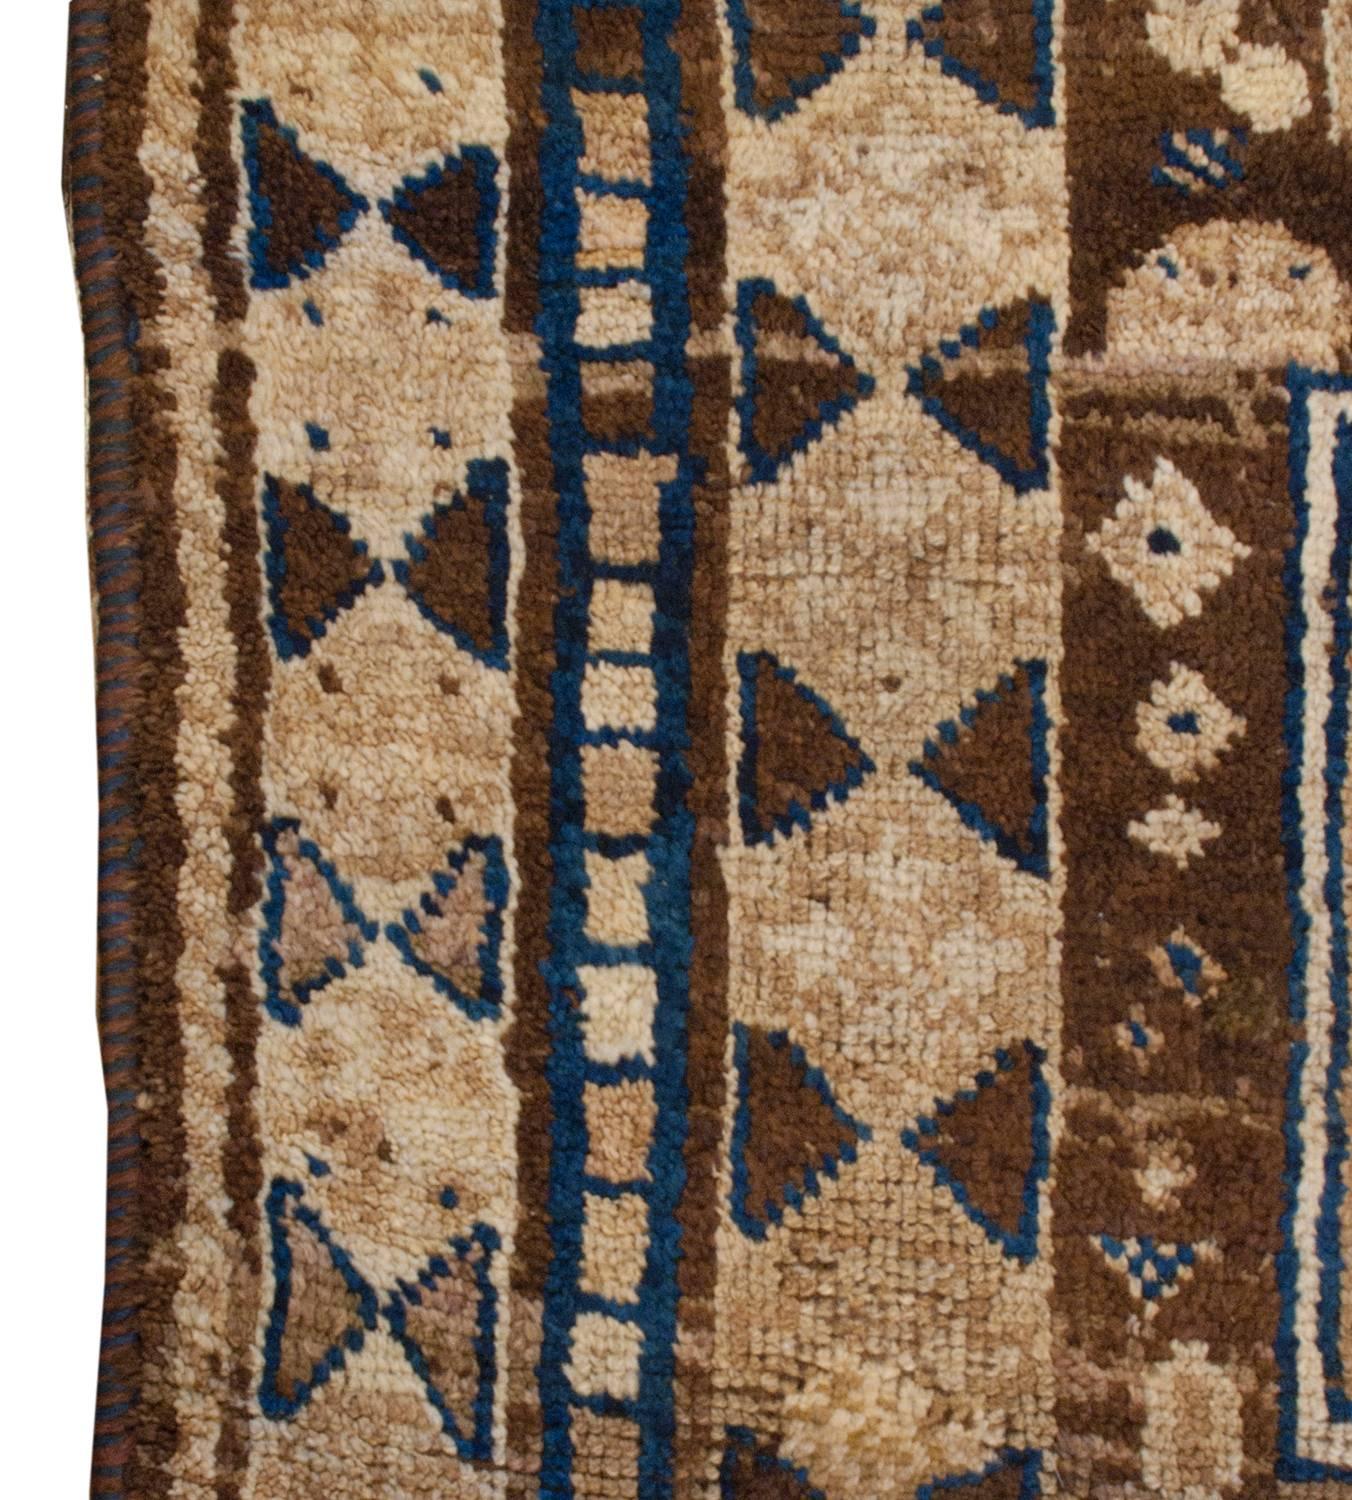 Vegetable Dyed Early 20th Century Gabbeh Rug